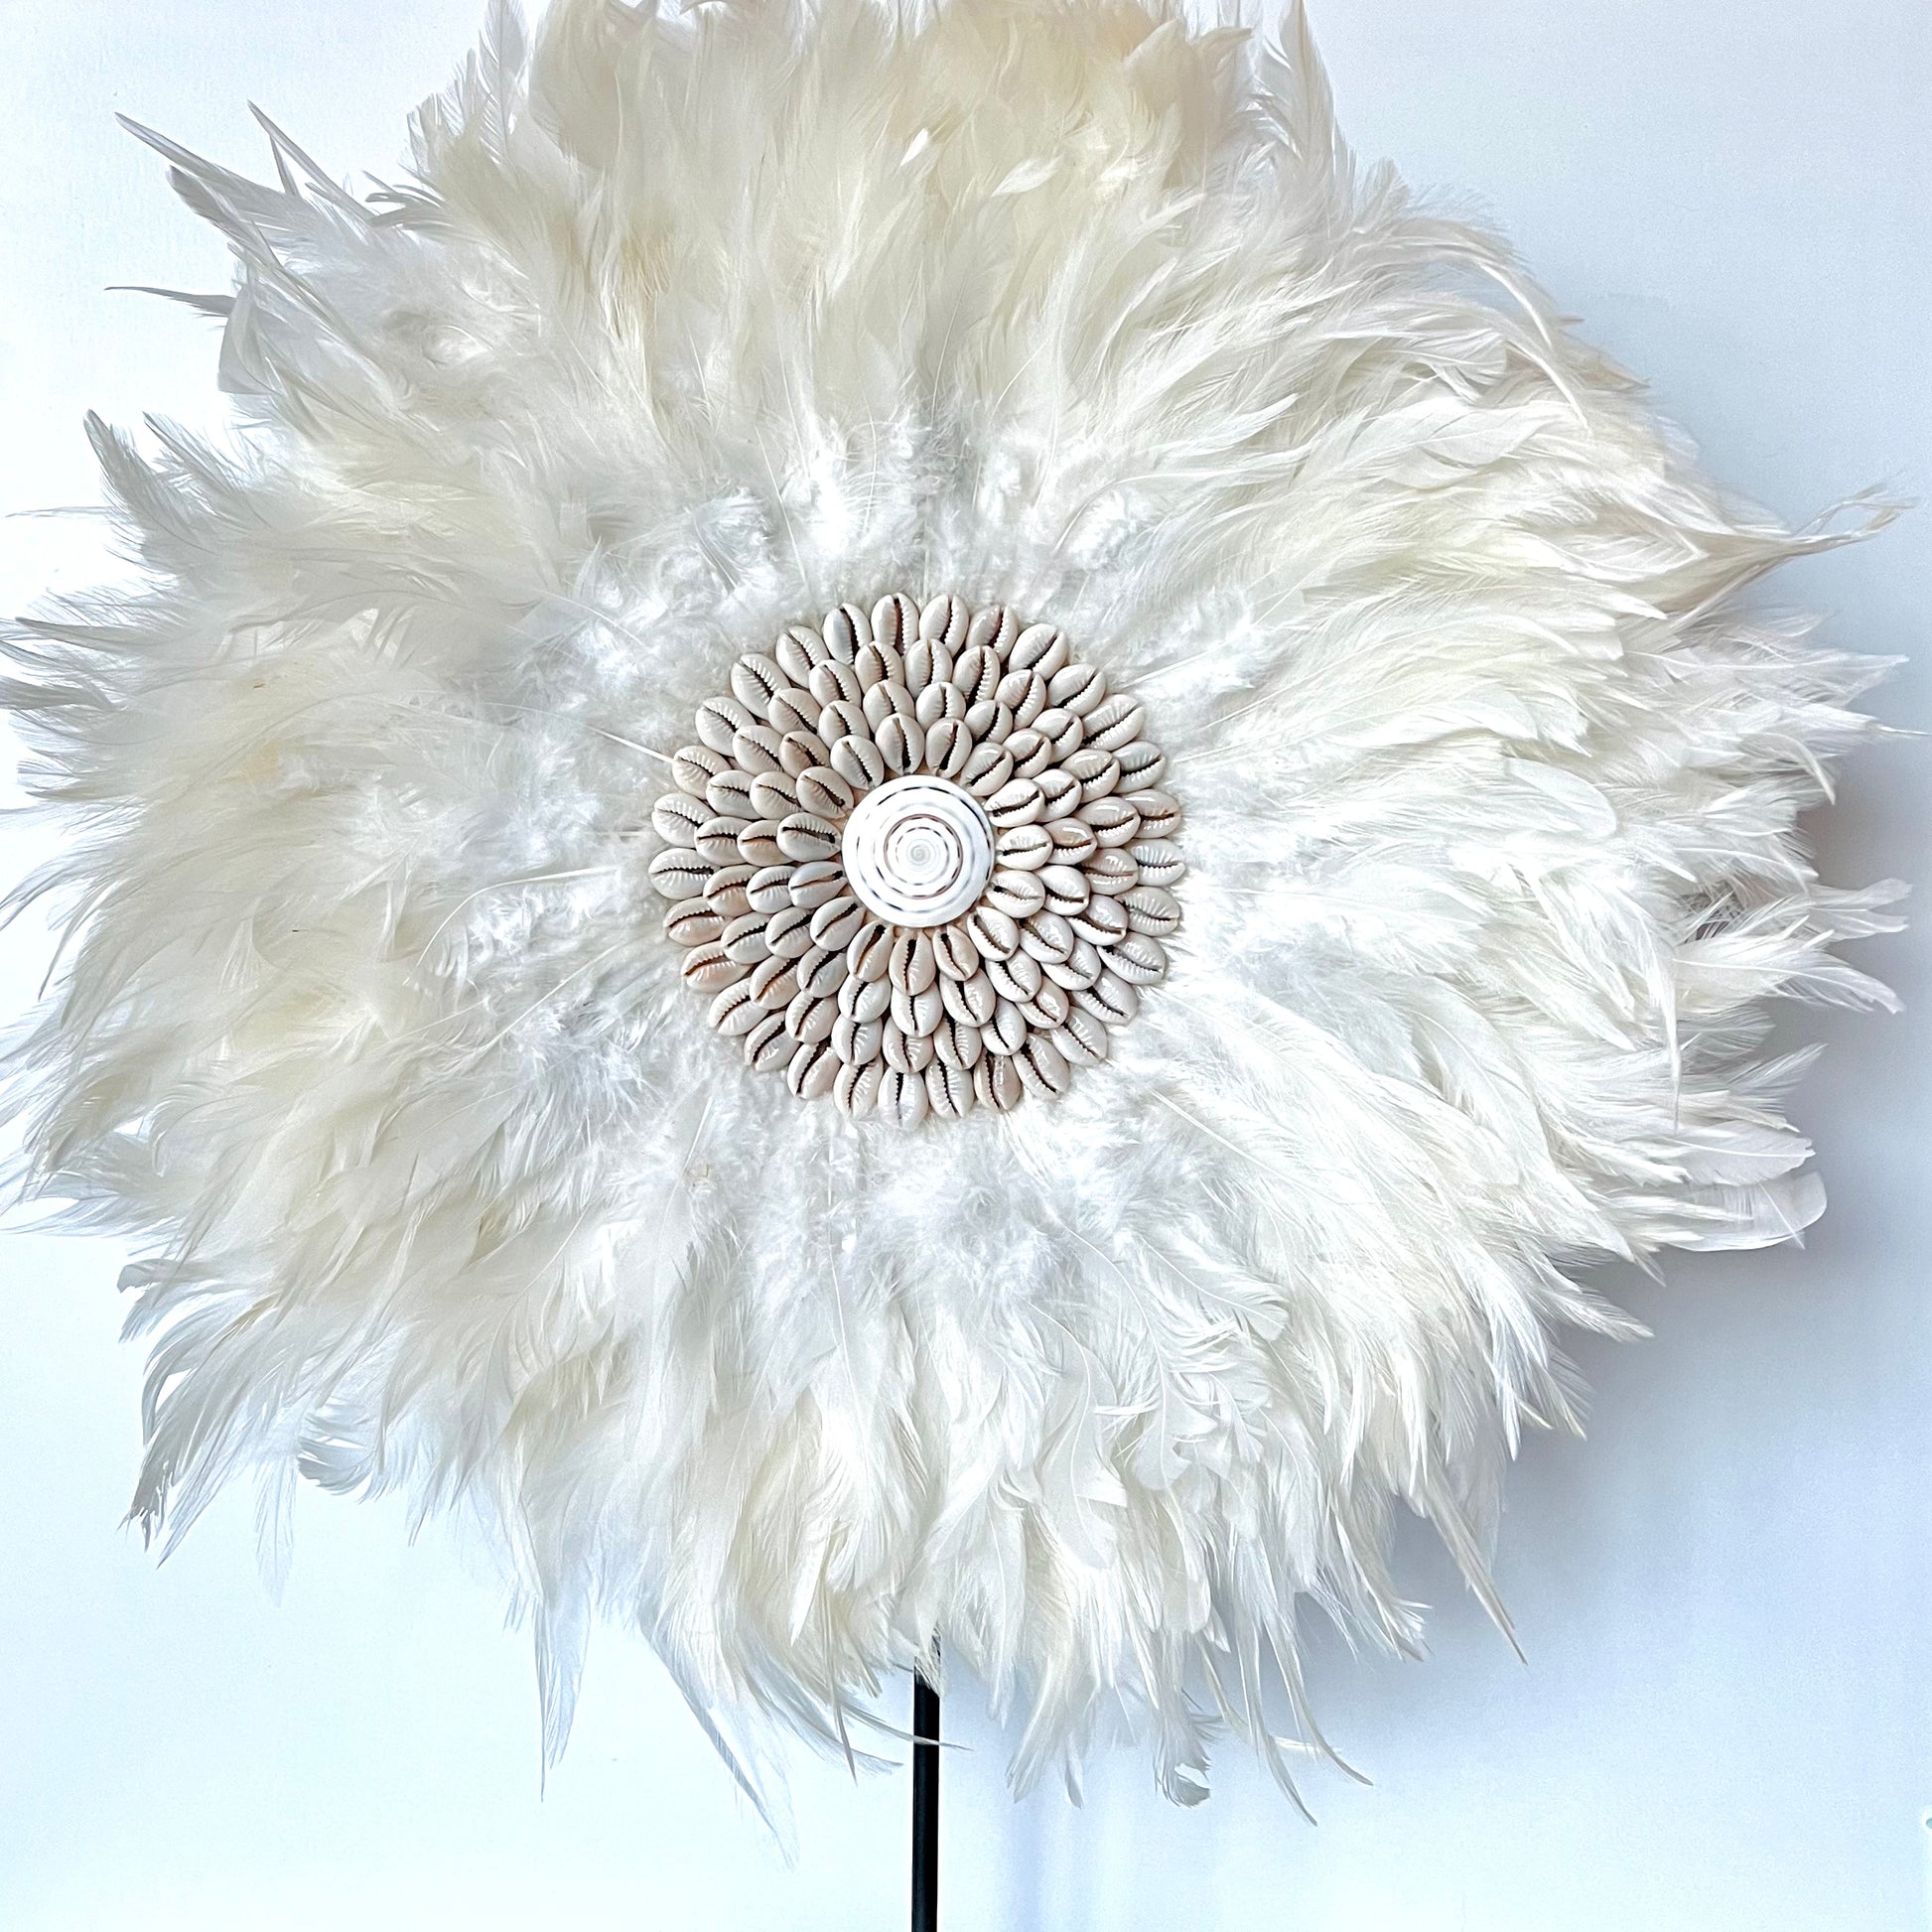 The Standing White Feathers Decor against a white background - The Offbeat Co.